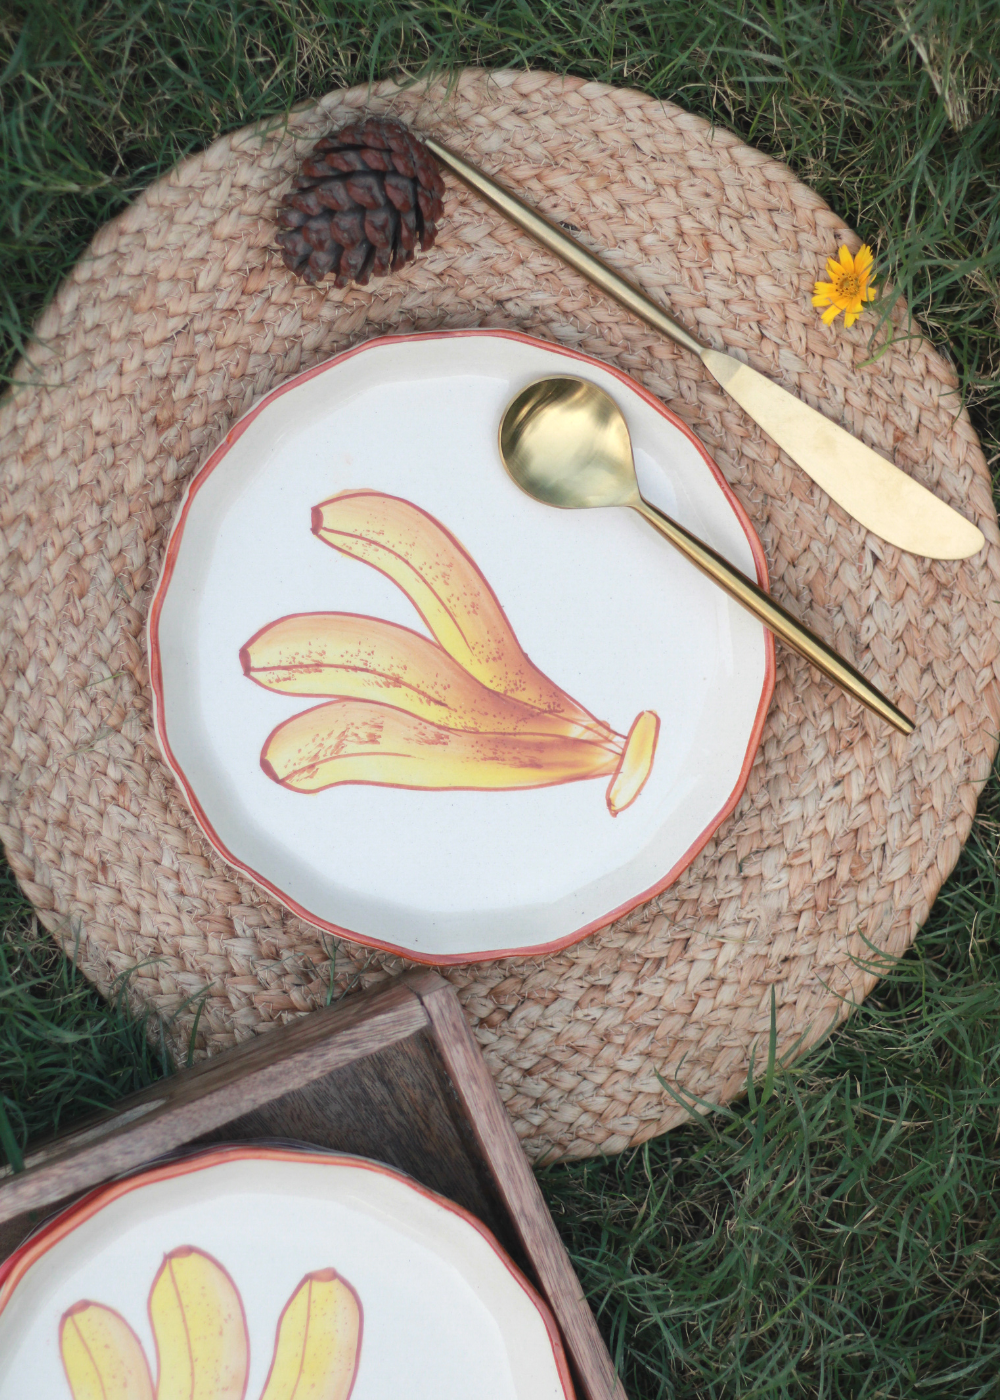 Banana plate on a mat with cutleries